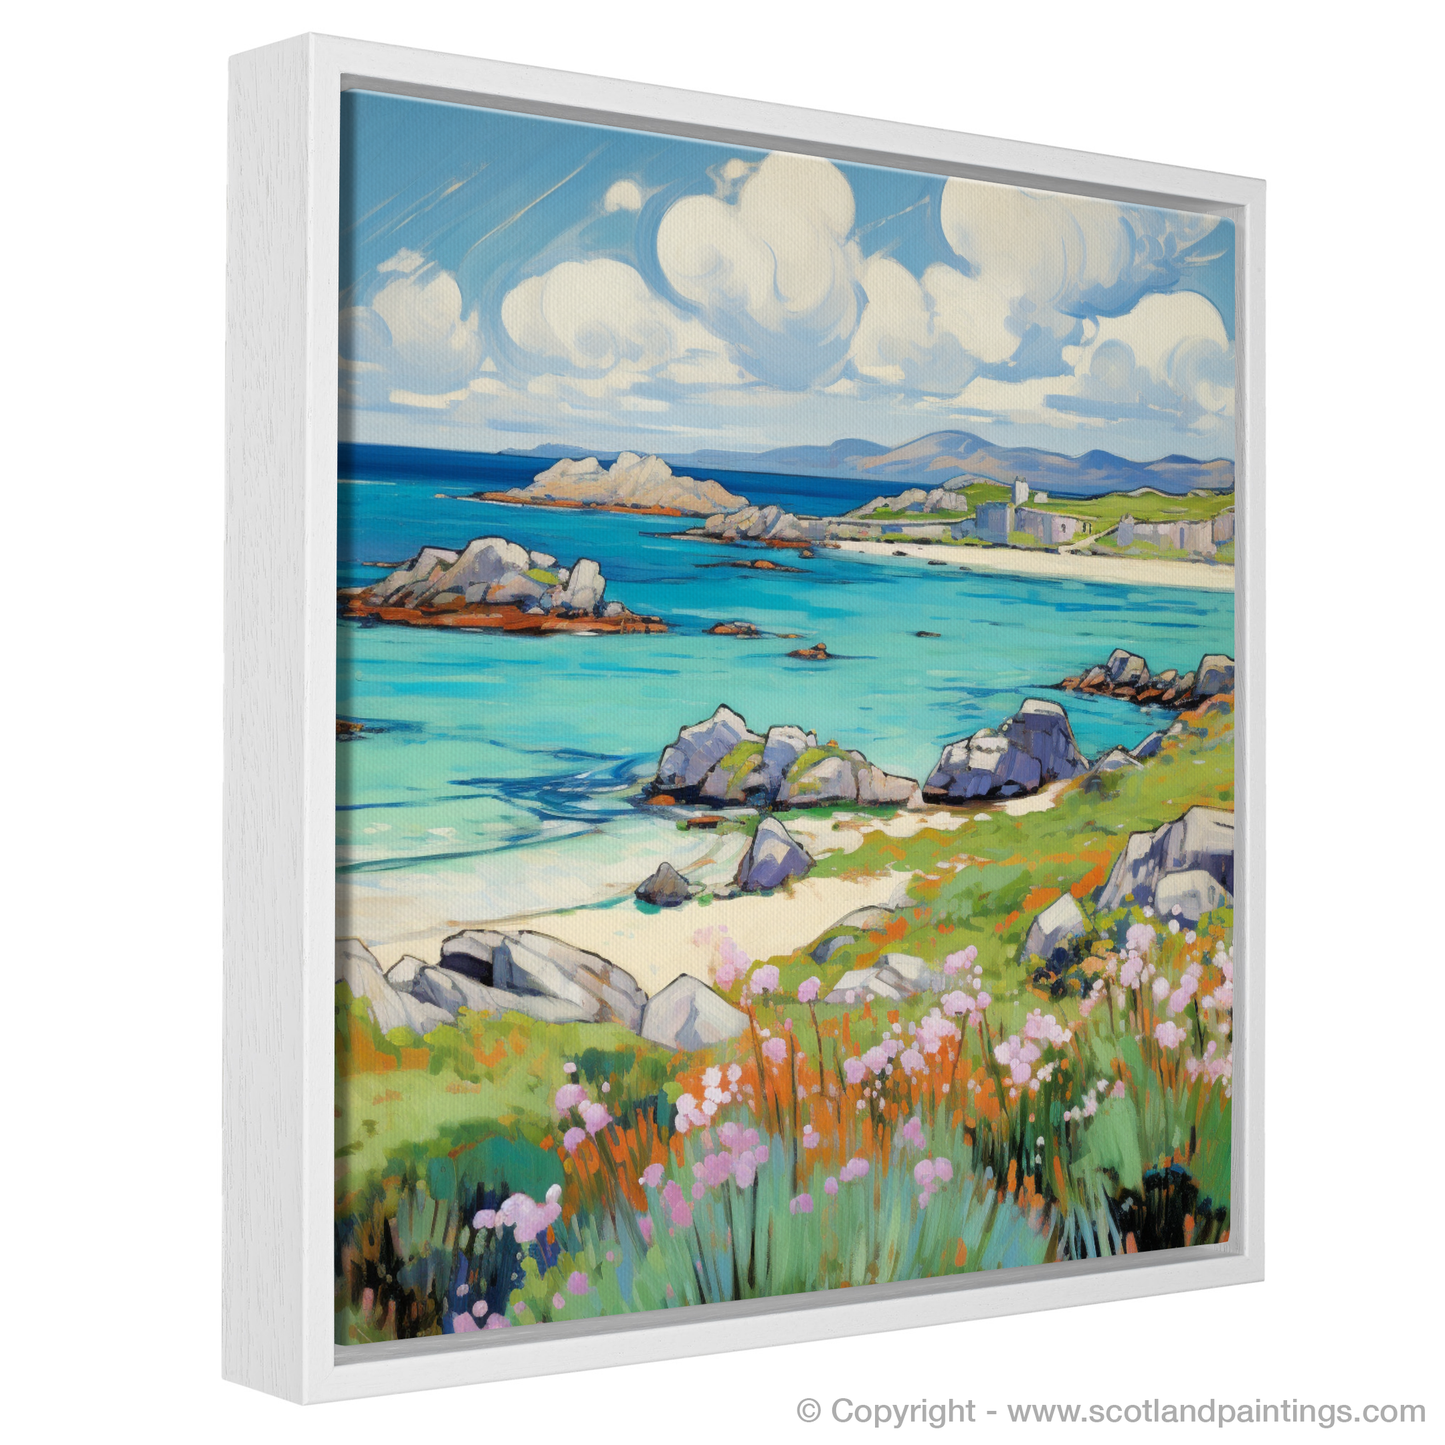 Painting and Art Print of Isle of Iona, Inner Hebrides in summer entitled "Summer Serenade on the Isle of Iona".